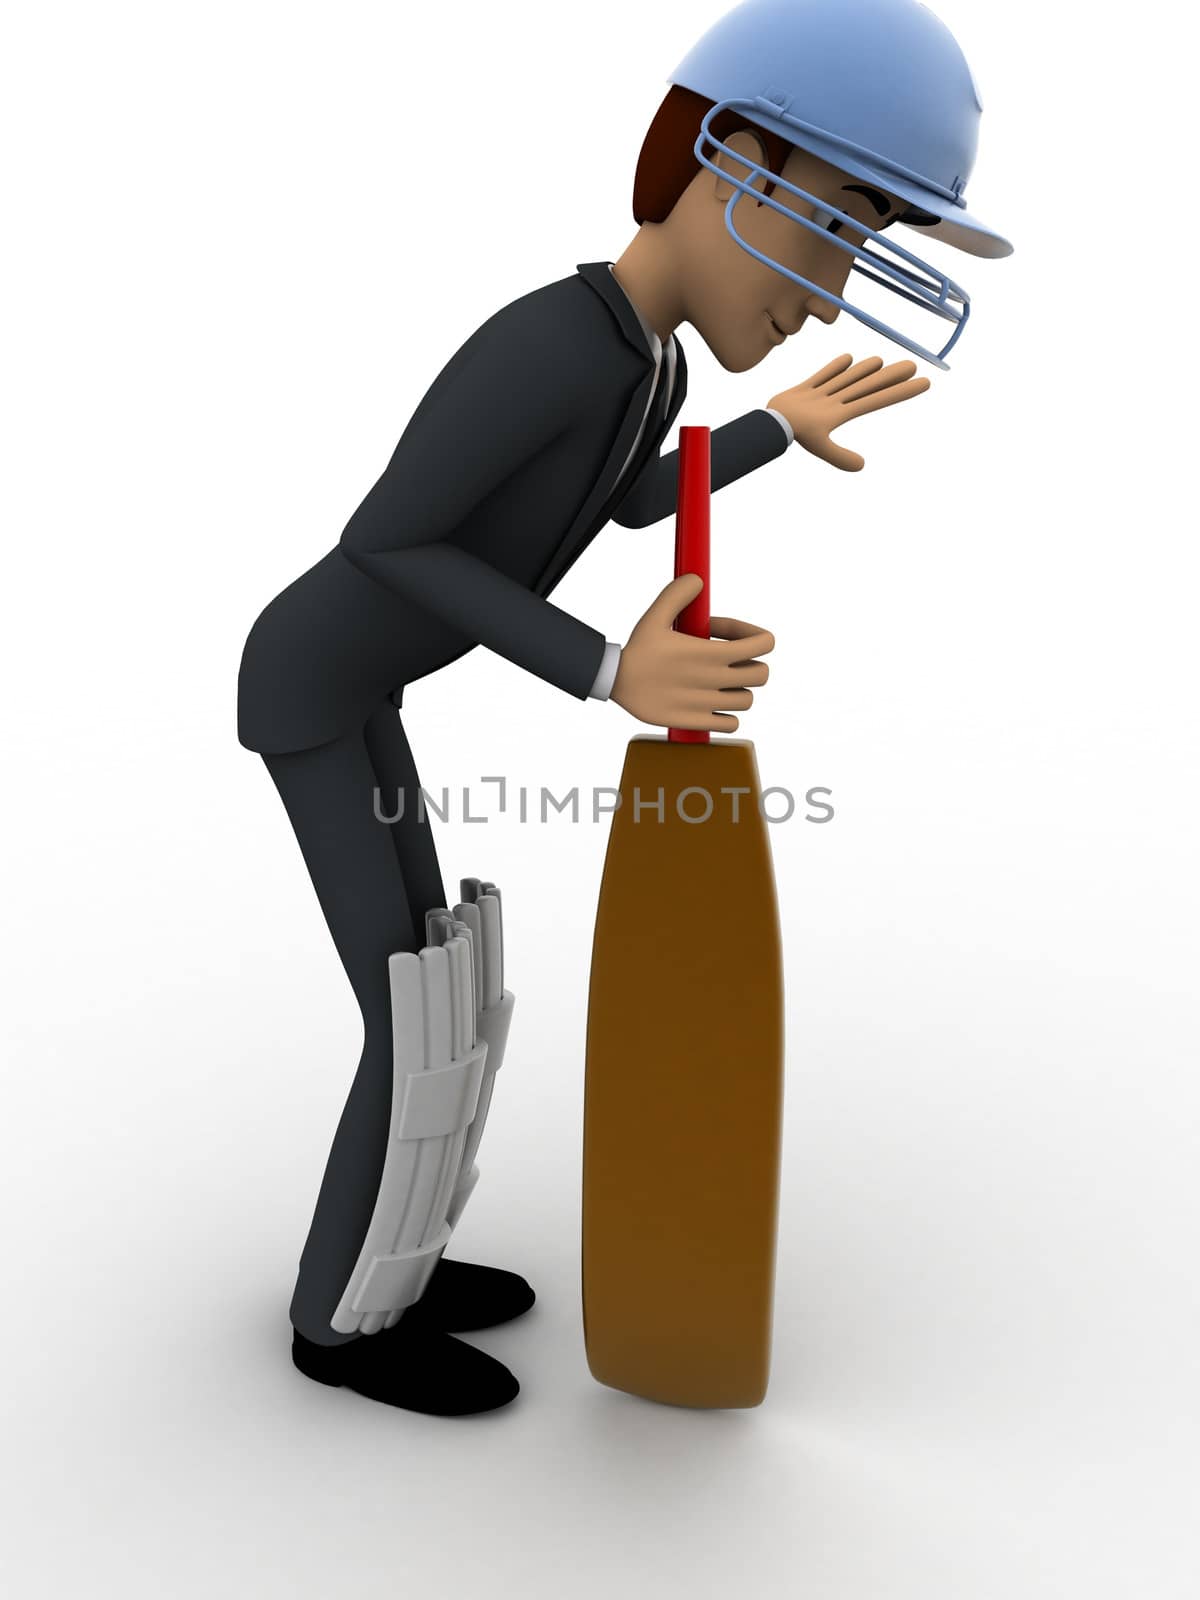 3d man cricket batsman asking to wait by showing hand concept by touchmenithin@gmail.com